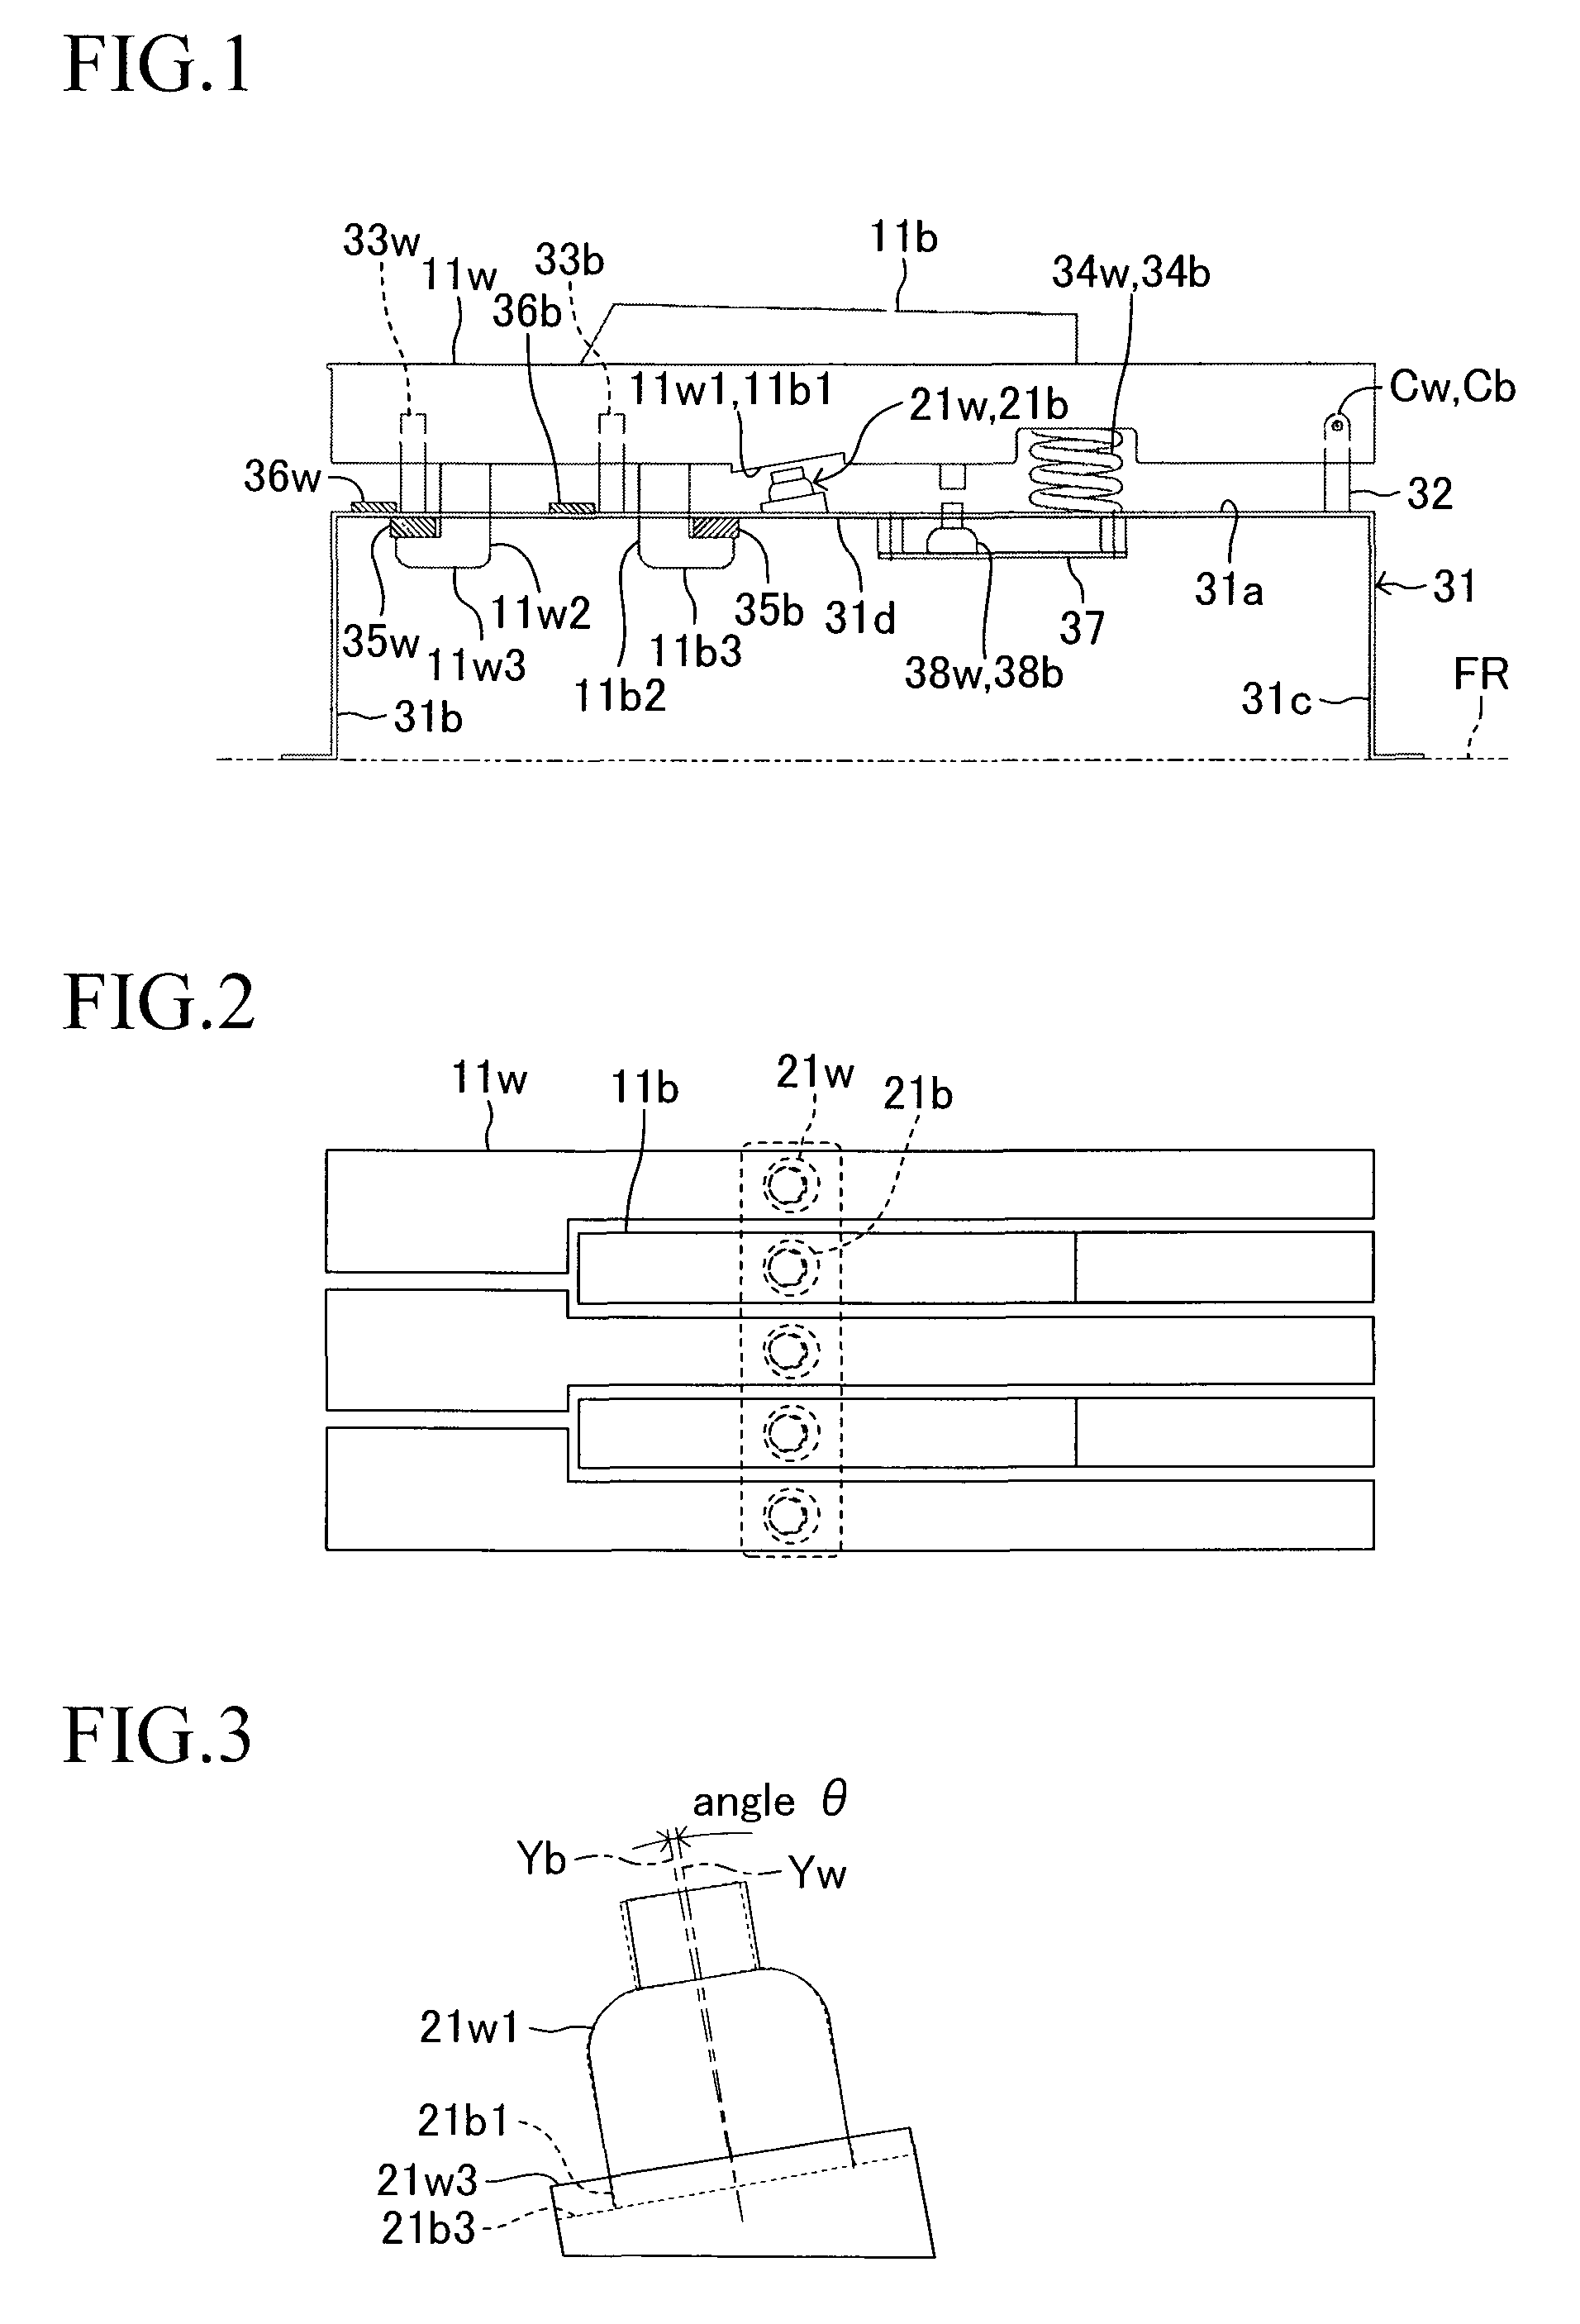 Keyboard apparatus for an electronic musical instrument